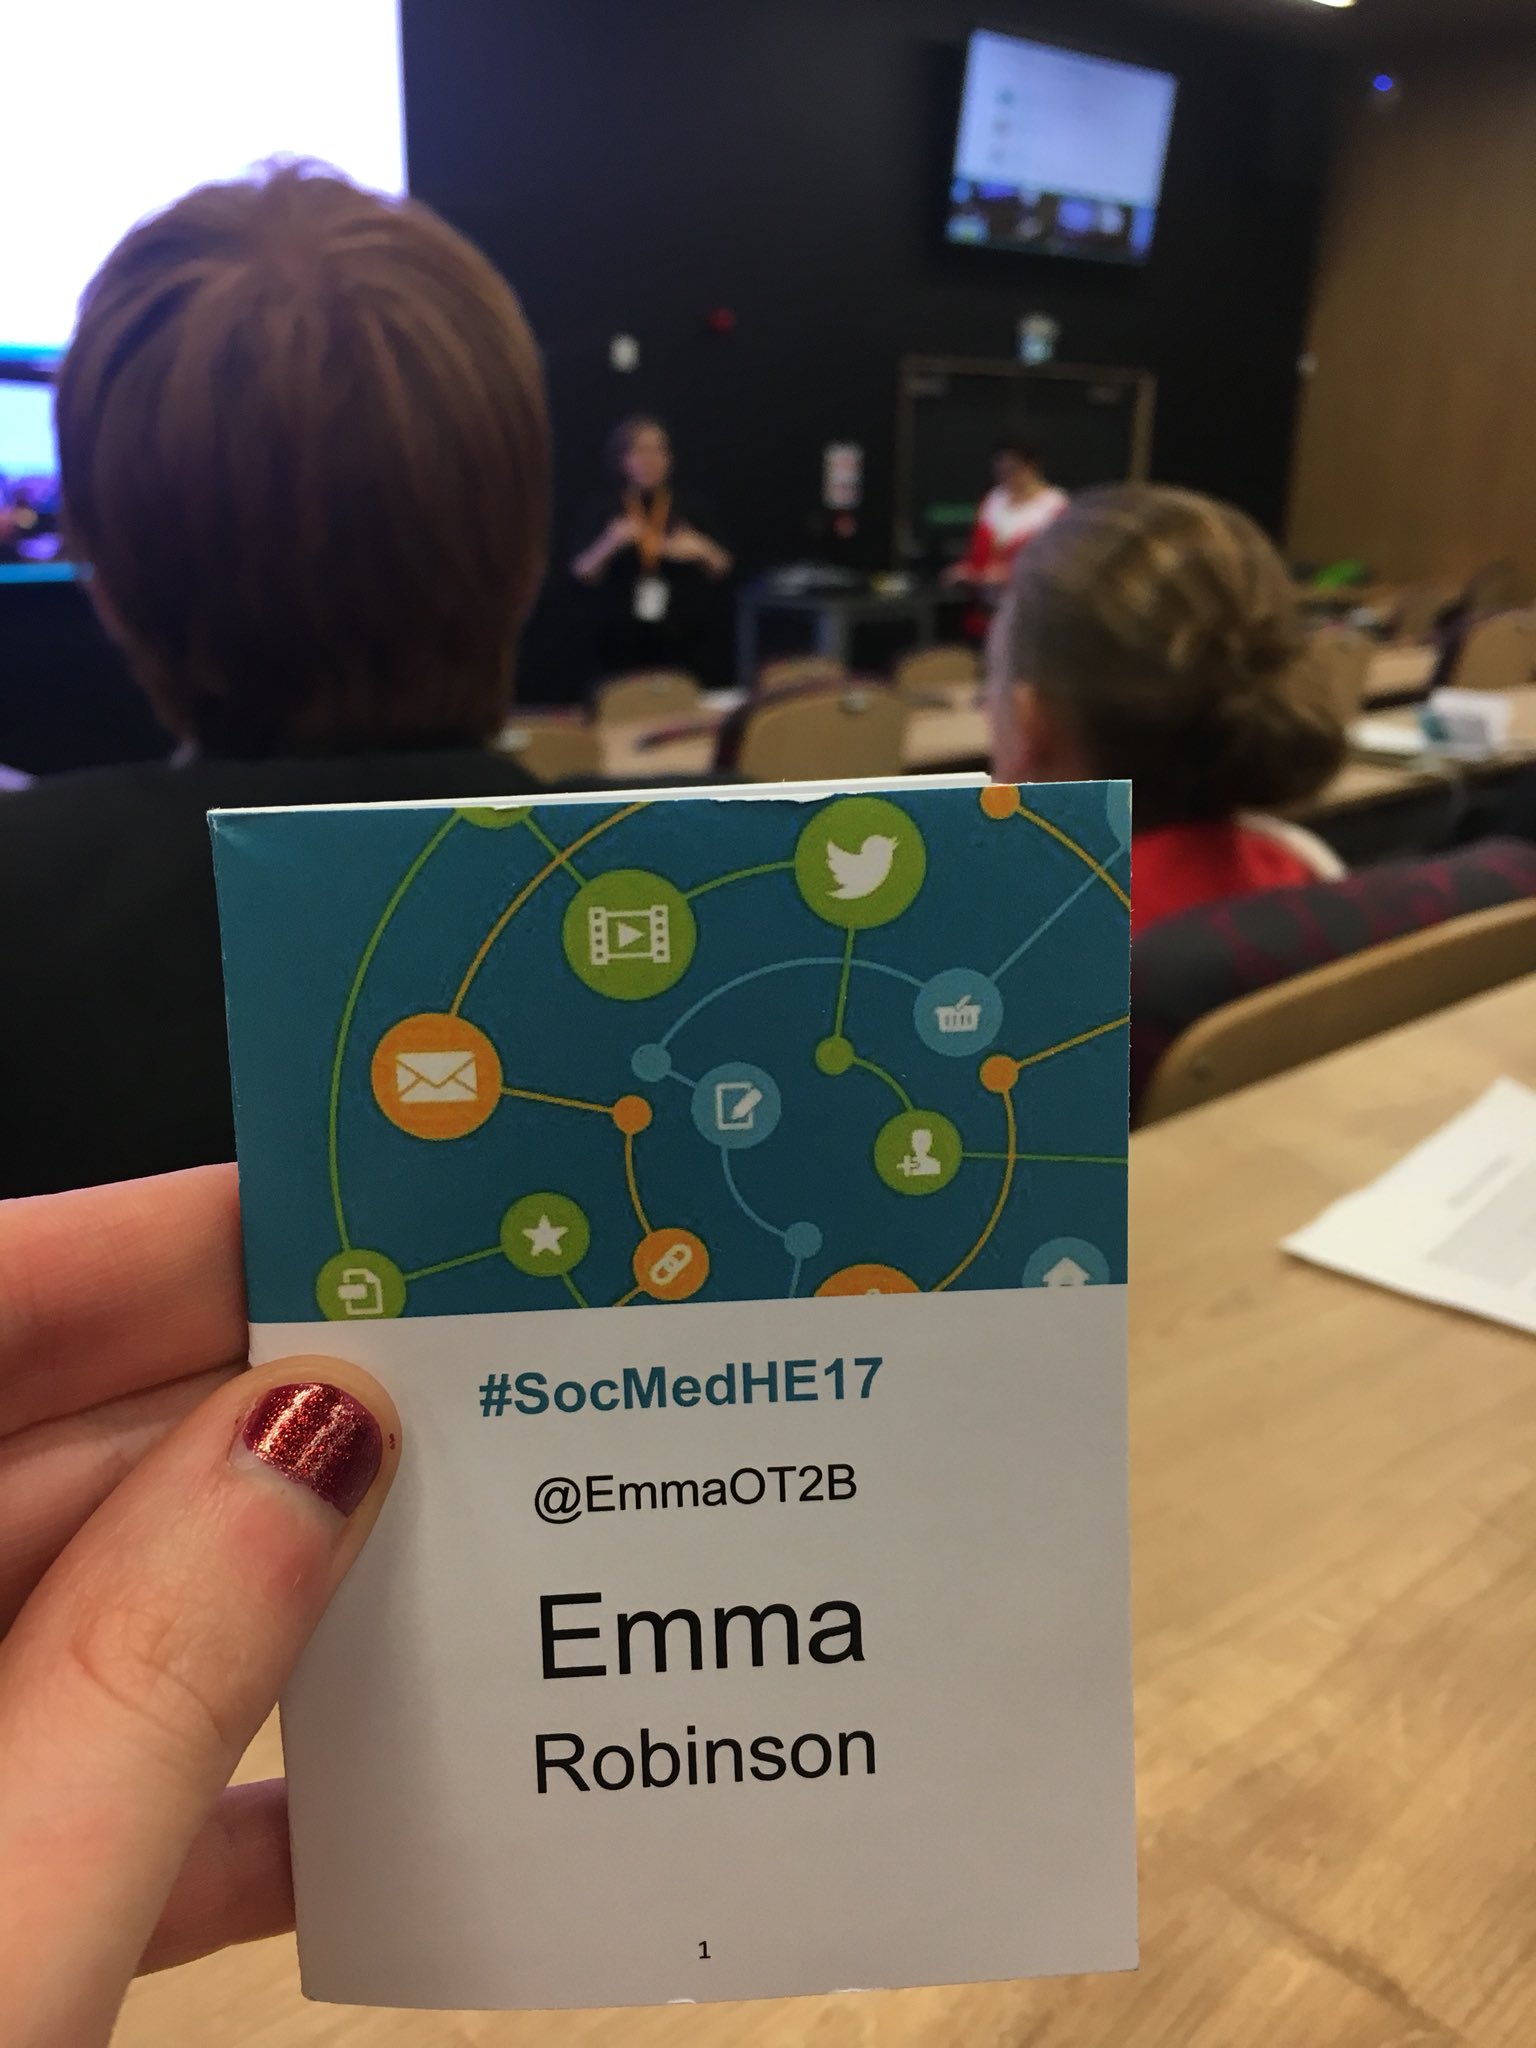 After a warm welcome to #SocMedHE17 looking forward to experiencing ‘build your own conference’ (BYOC) 😄 @SocMedHE https://t.co/TL8OPGYW7K